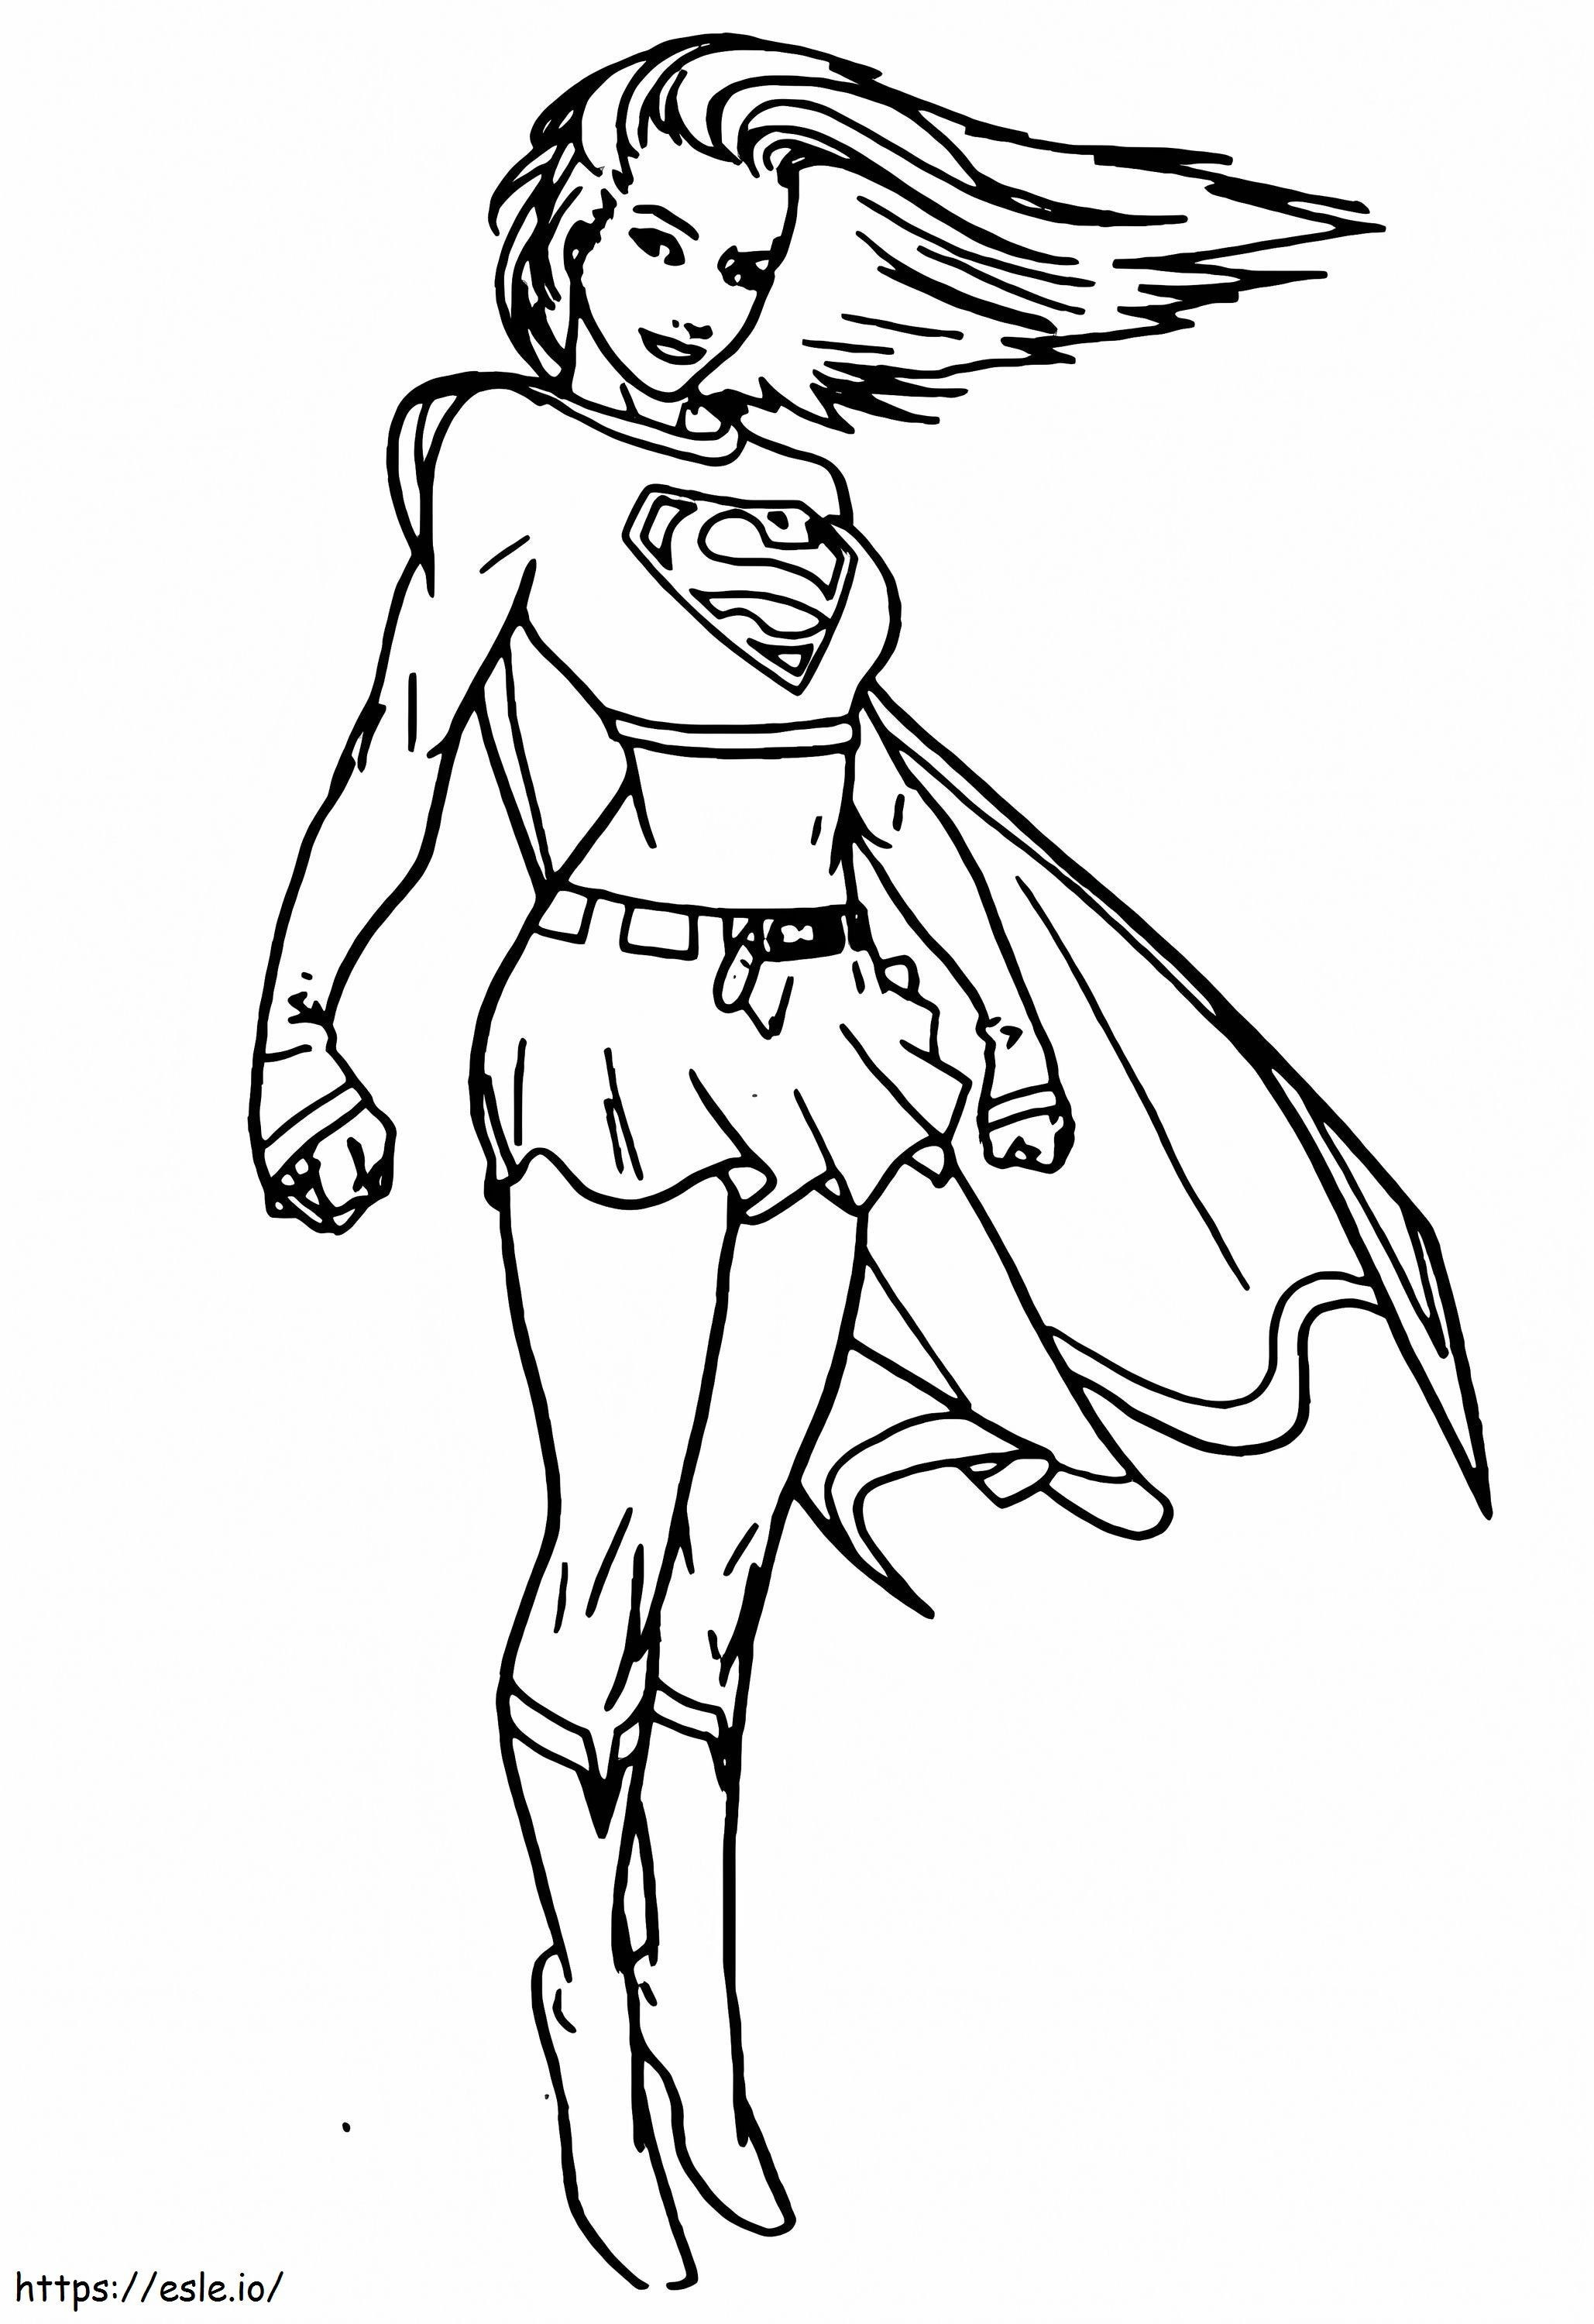 Cool Supergirl coloring page